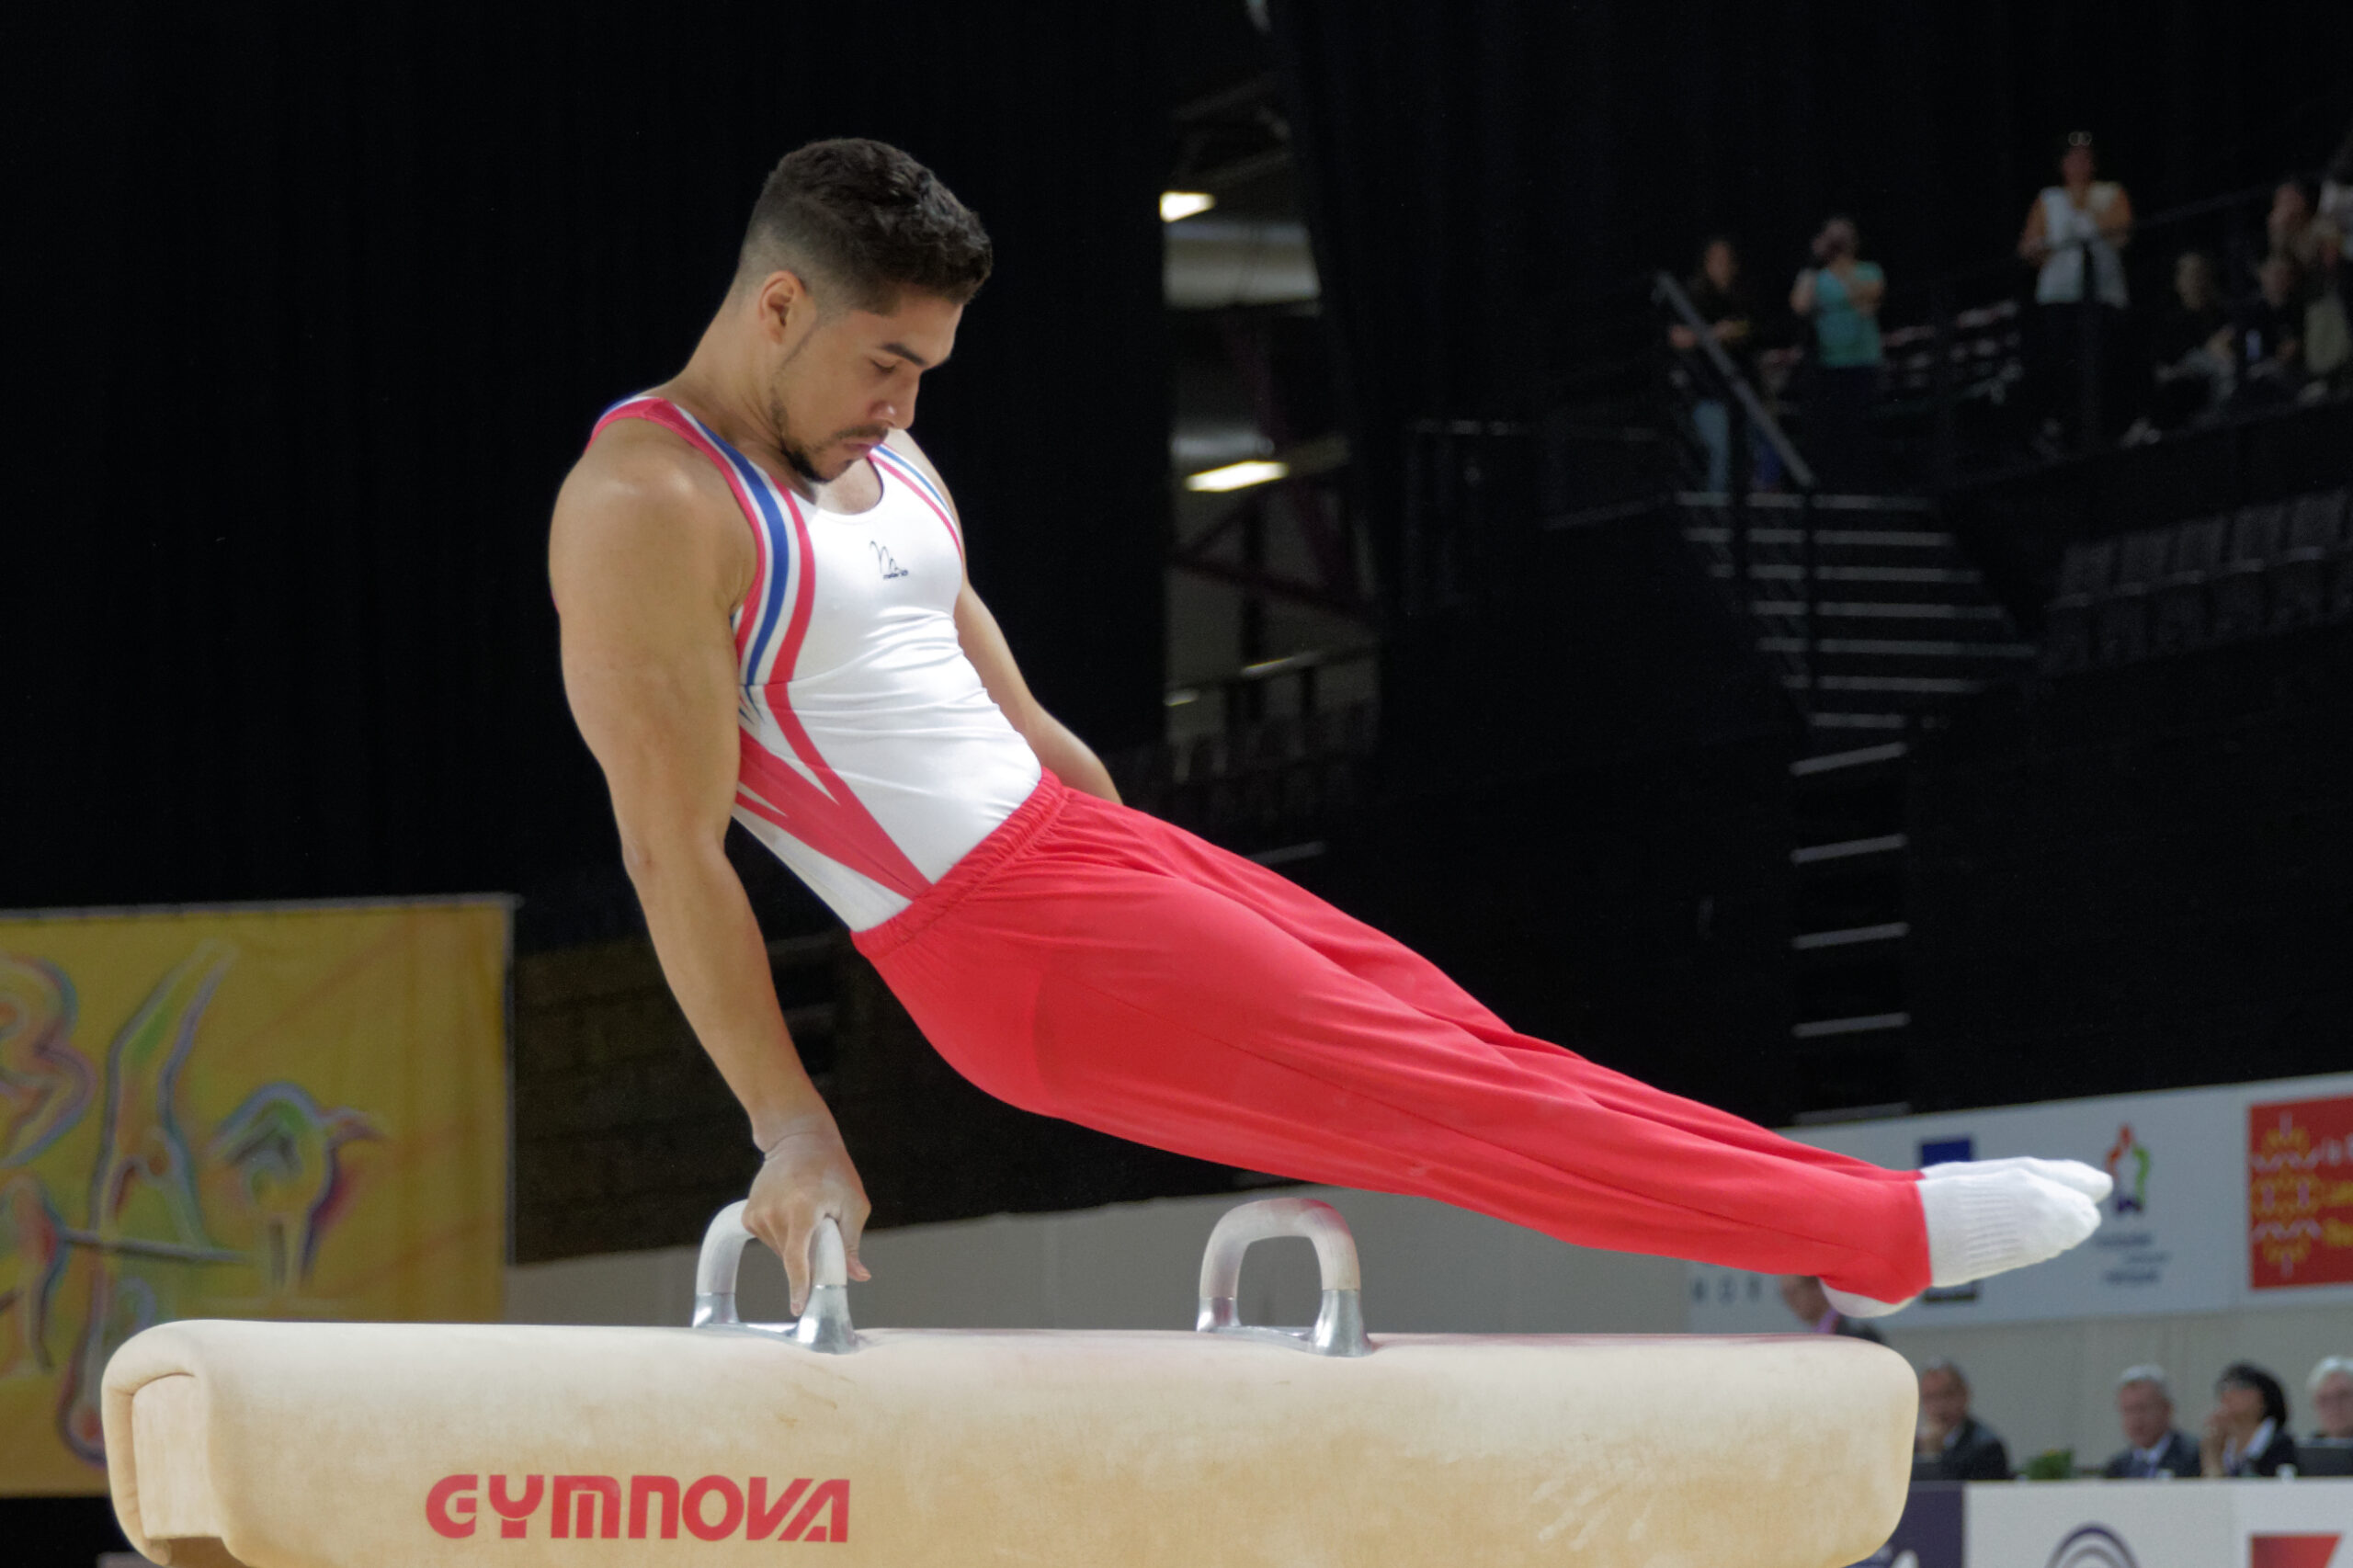 Louis Smith competing in the pommel horse finals at the 2015 European Artistic Gymnastics Championship